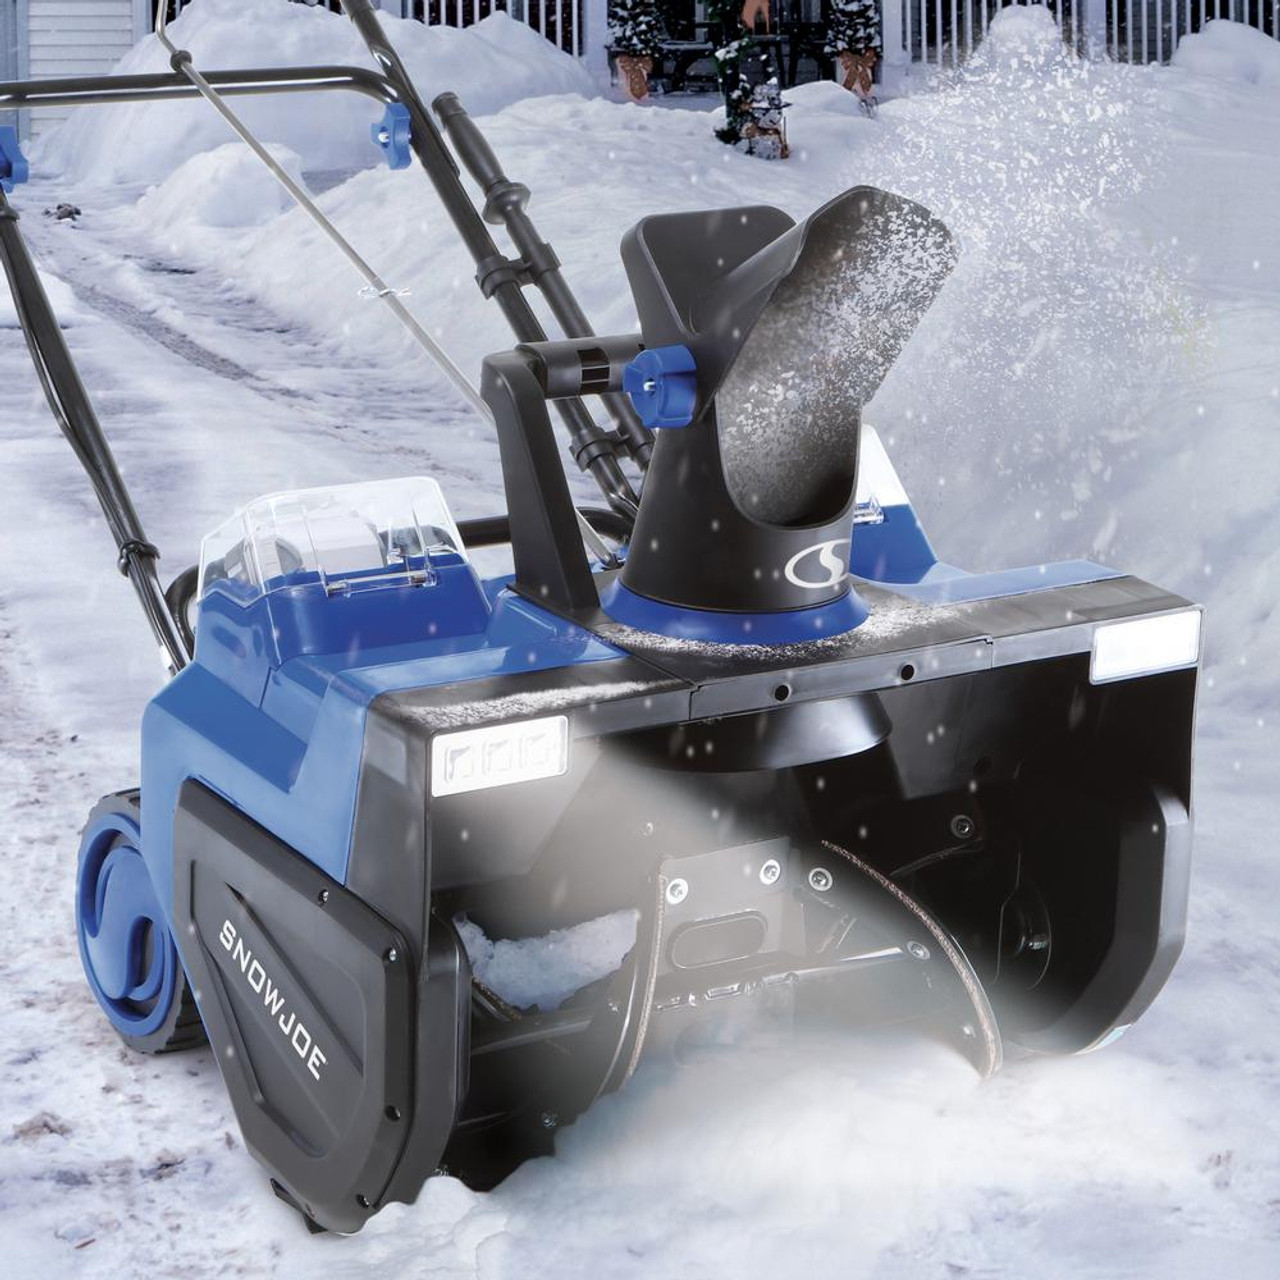 Snow Joe® 48-Volt Cordless Electric Snow Blower Kit with (2) 8Ah Batteries product image